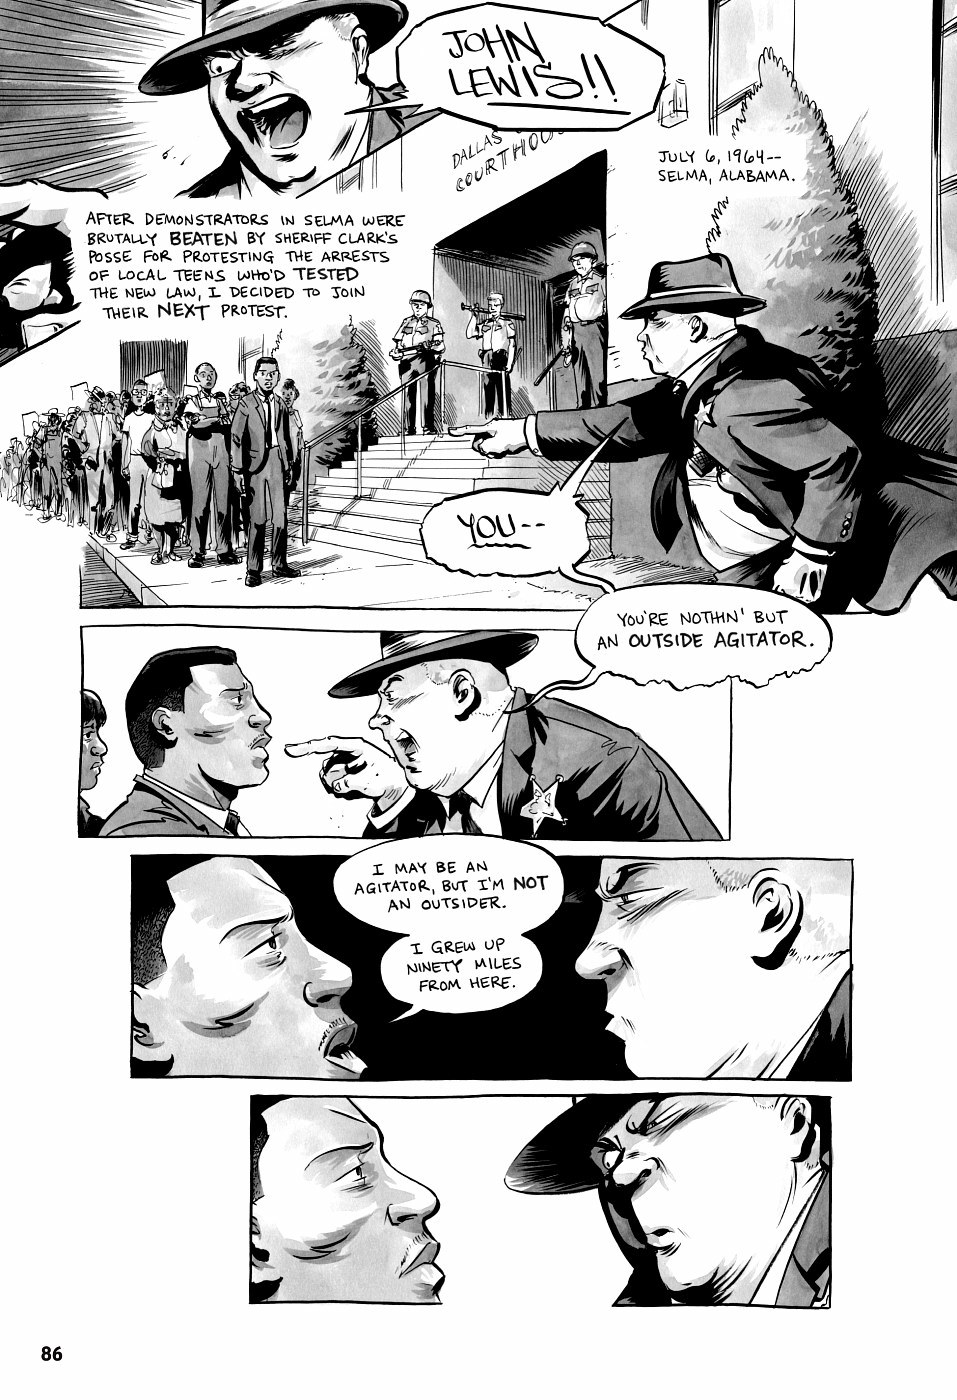 page 86 of march book three graphic novel